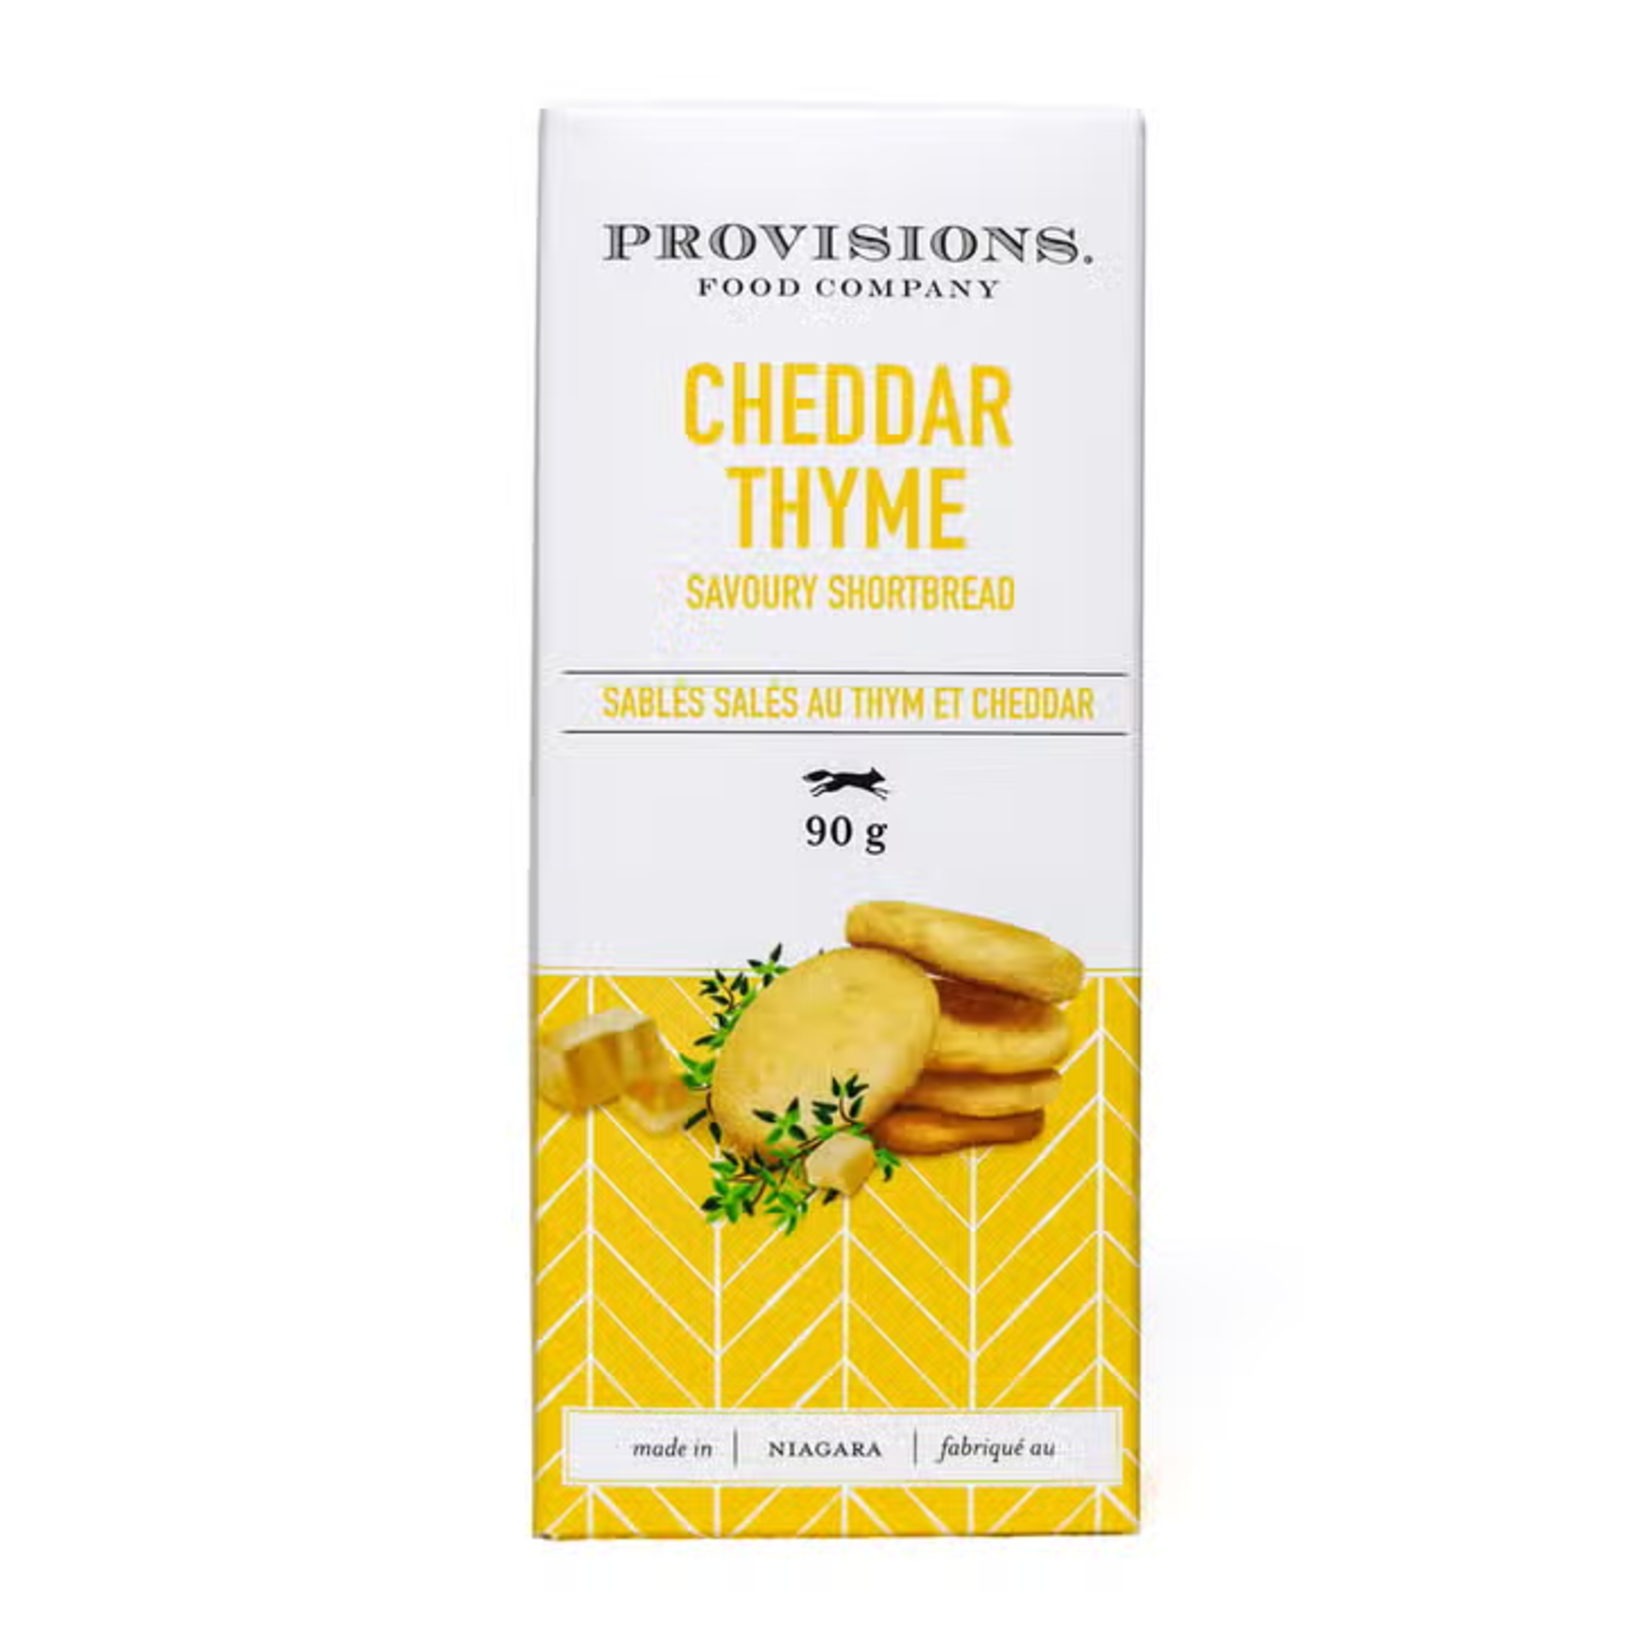 Provisions Food Company Cheddar & Thyme Shortbreads